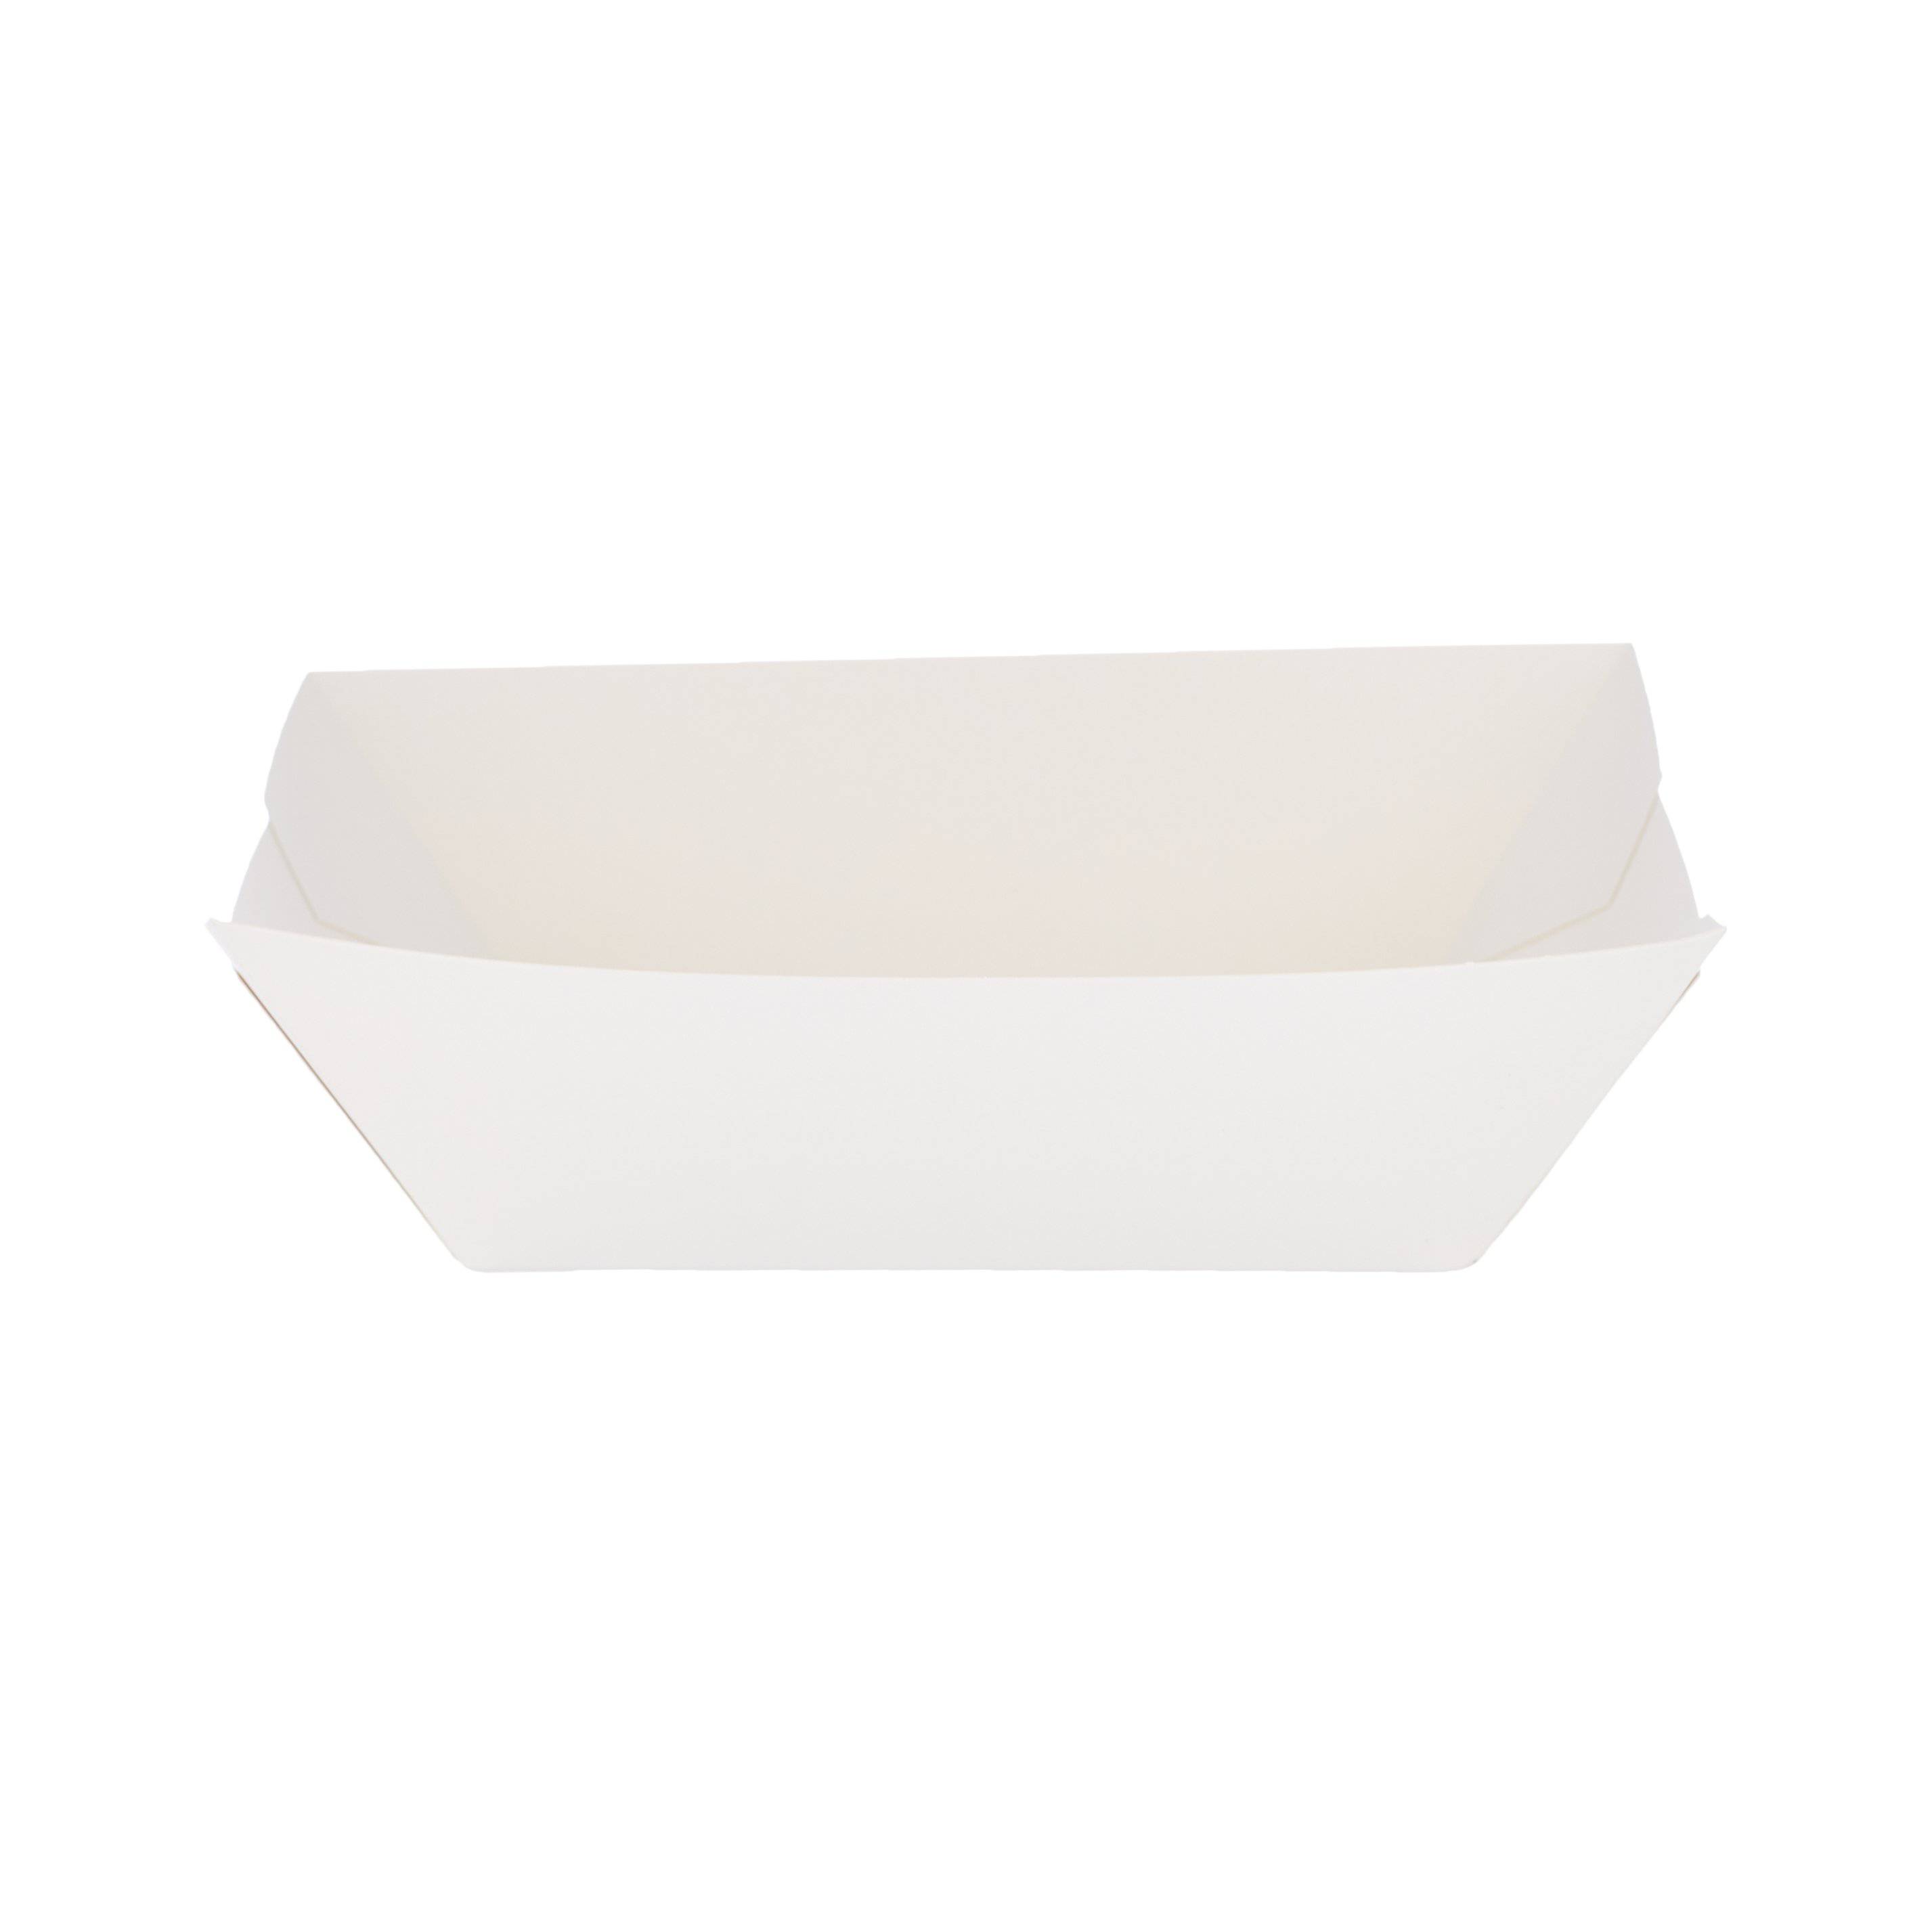 White Paper Boat Tray Small 700 Pieces - Hotpack Global